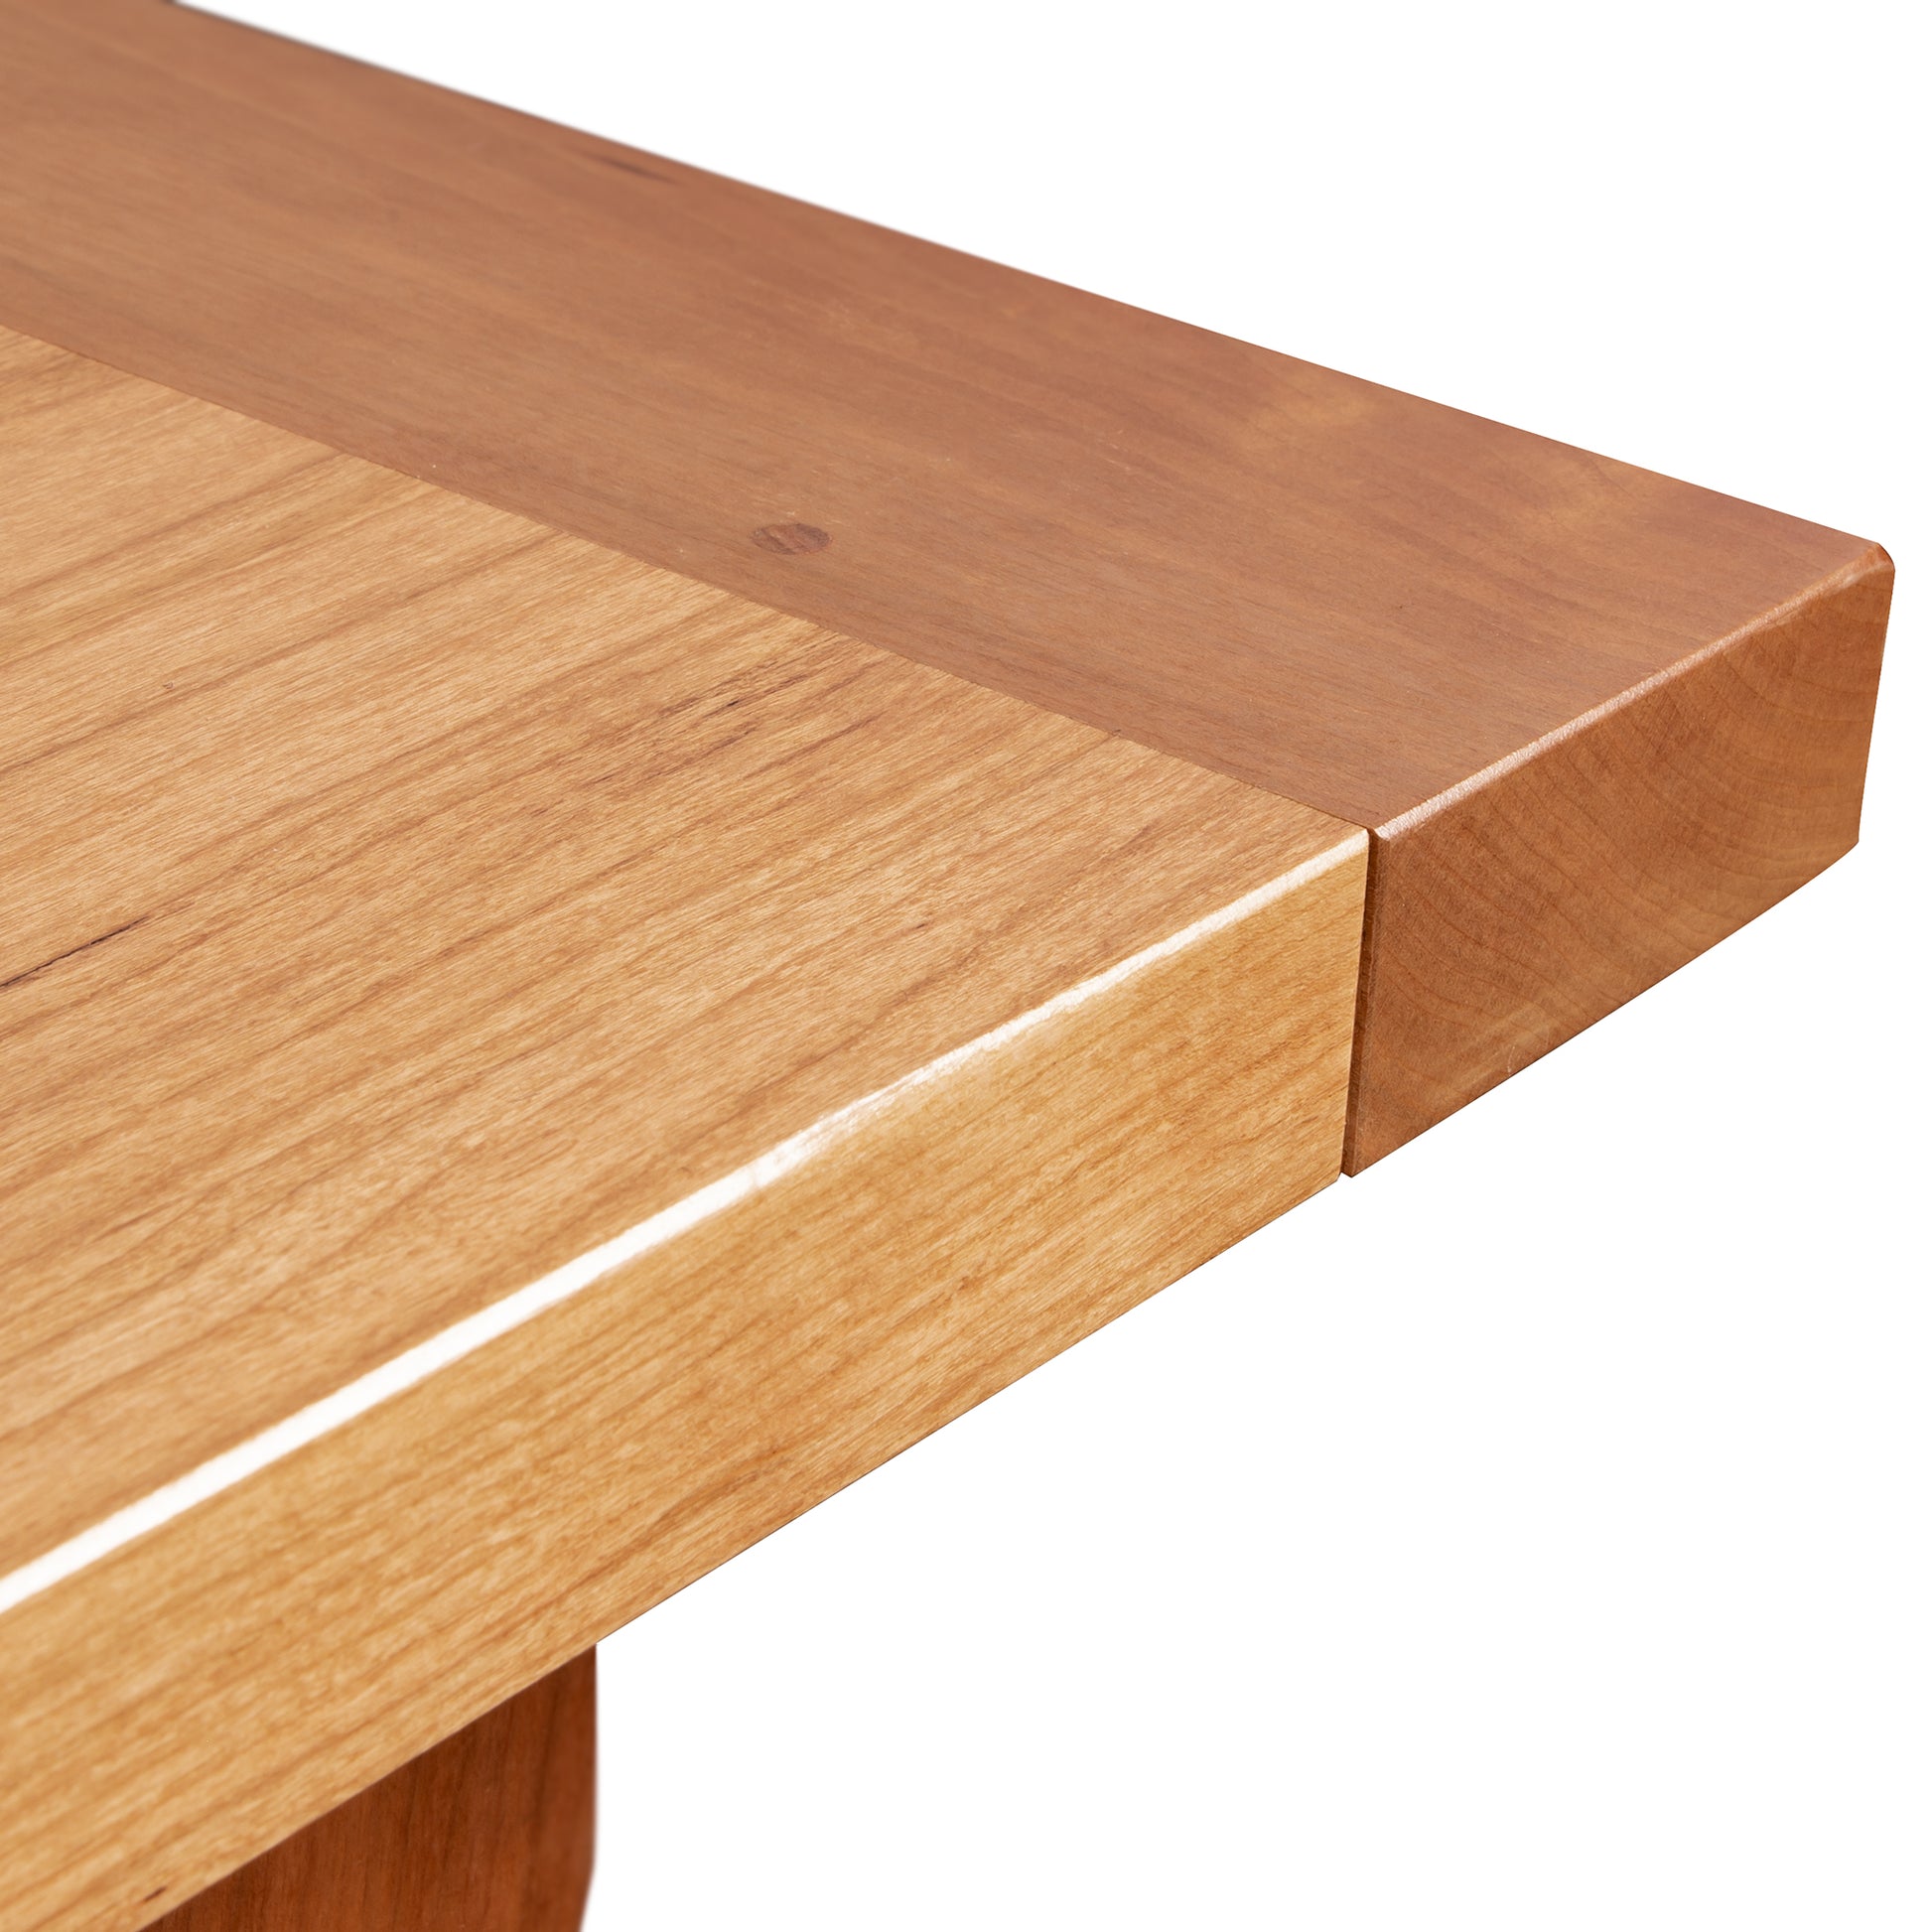 Close-up of a natural cherry Maple Corner Woodworks Vermont Shaker Solid Top Harvest Table corner showing smooth, polished surfaces with visible wood grain, emphasizing the durable construction and quality of the material.